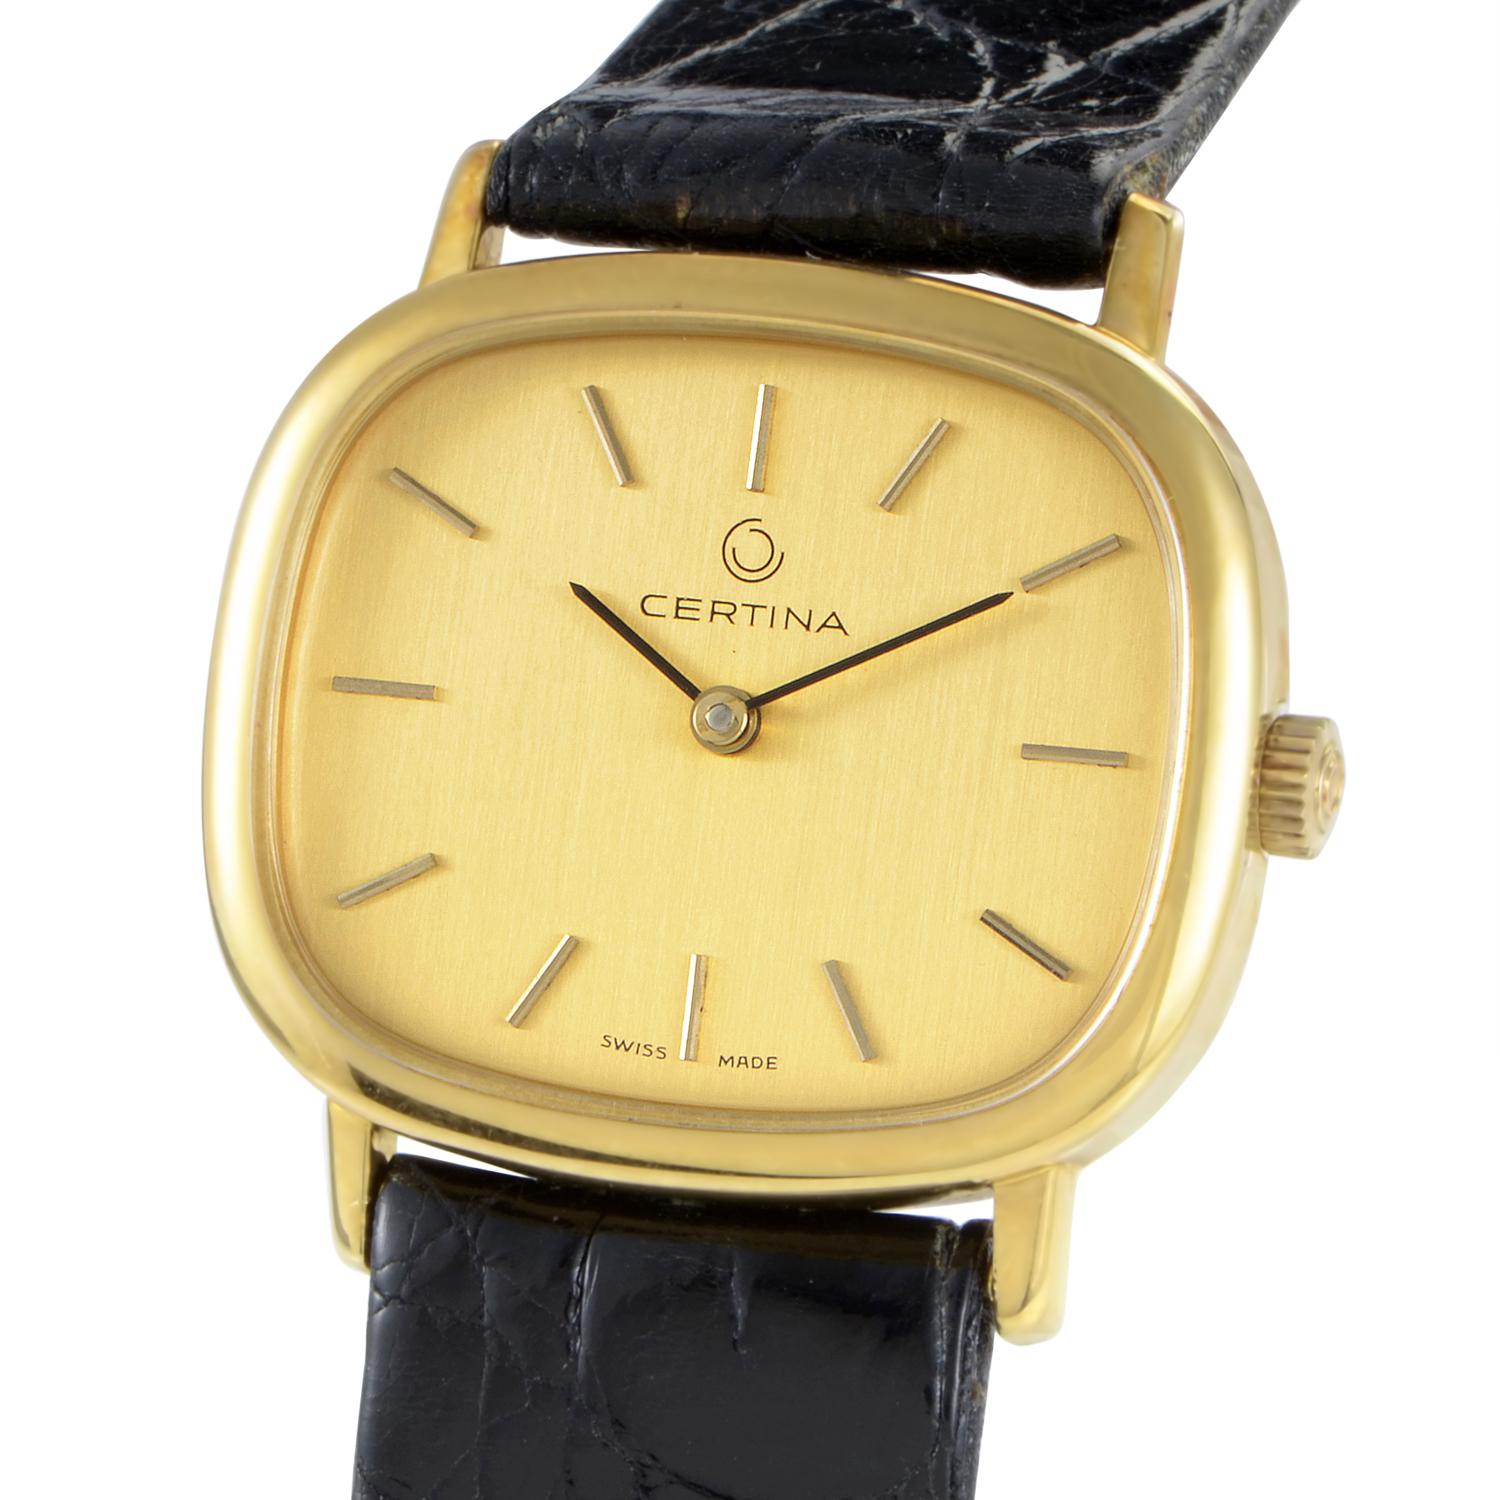 This quartz watch from Certina has a tasteful look that is perfect for everyday wear. The watch's rectangular case is made of 18K yellow gold and boasts a champagne-colored dial. The dial is fairly simple and only displays indication of the hours